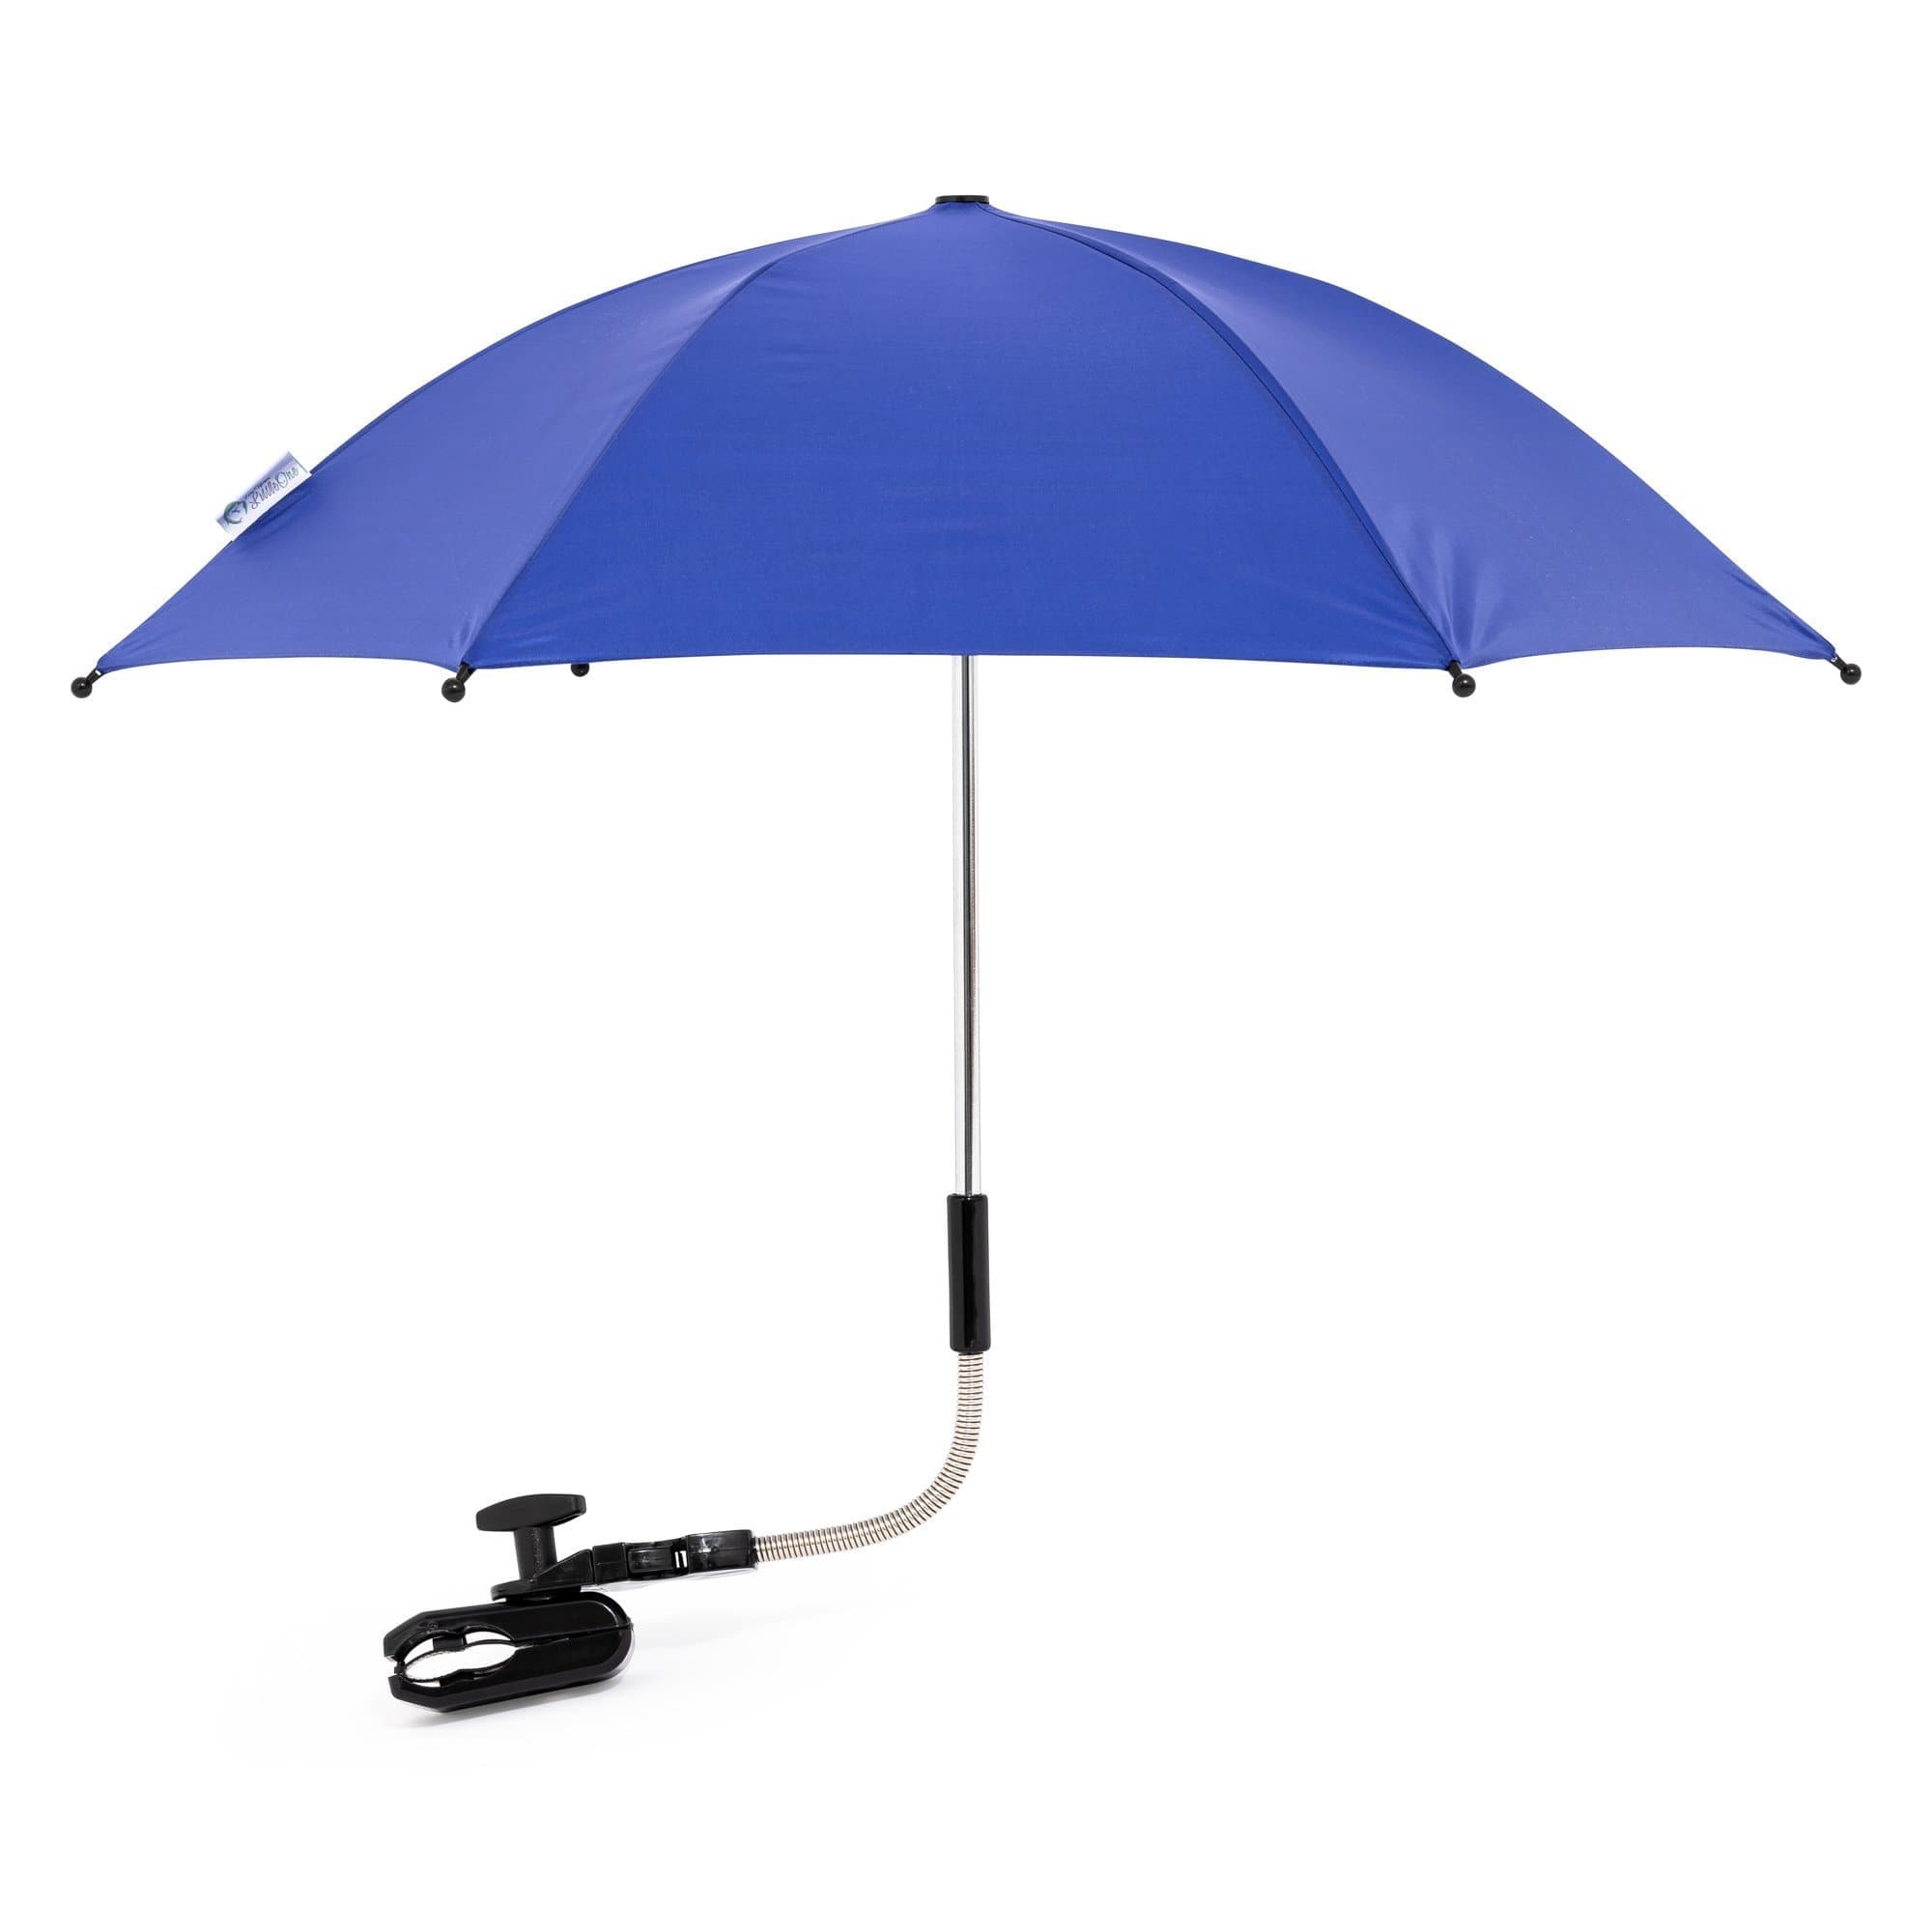 Baby Parasol Compatible With Egg - Fits All Models - For Your Little One